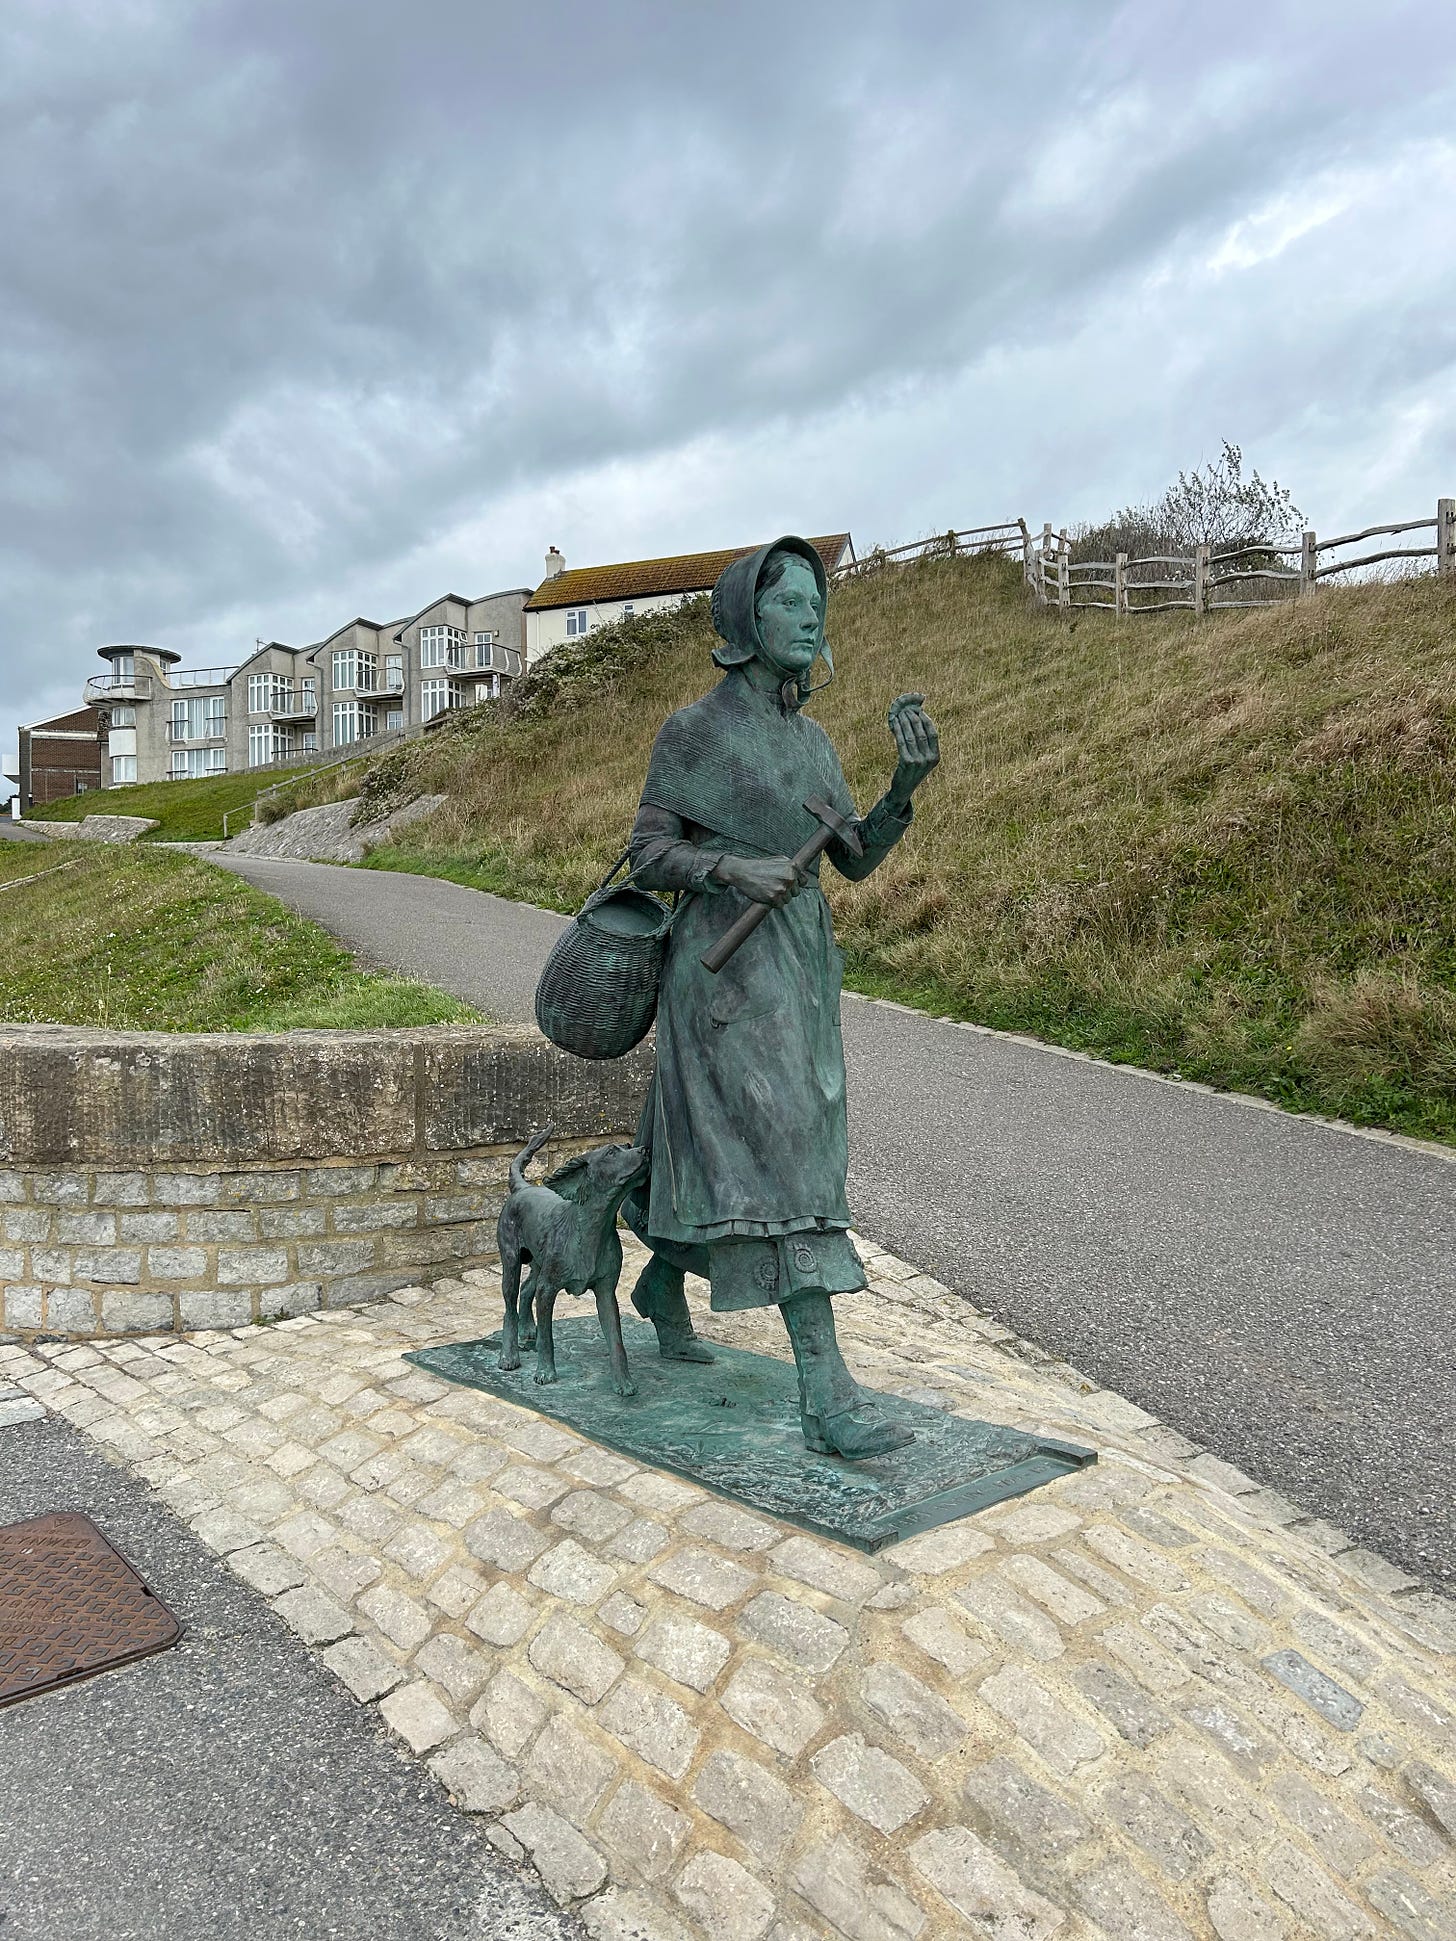 A bronze statue of Mary Anning and her dog. She is looking out to sea across a bay not in view in this photo. In the background is a grassy bank and some houses on the horizon. Image: Roland’s Travels